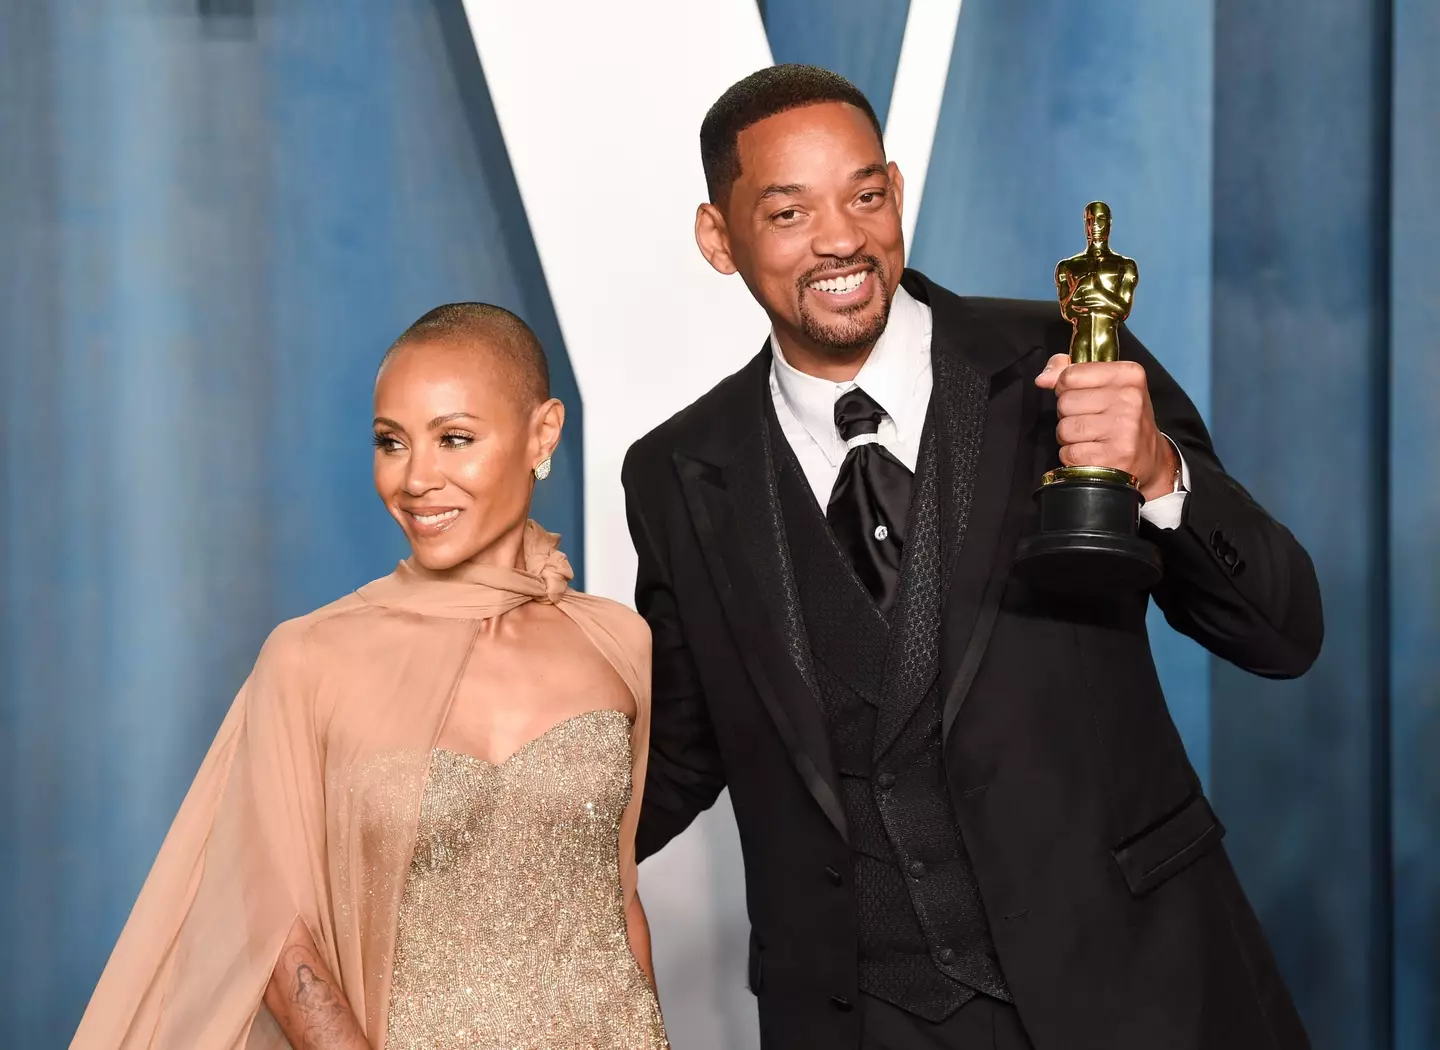 Will Smith and wife Jada Pinkett Smith together at the Oscars.